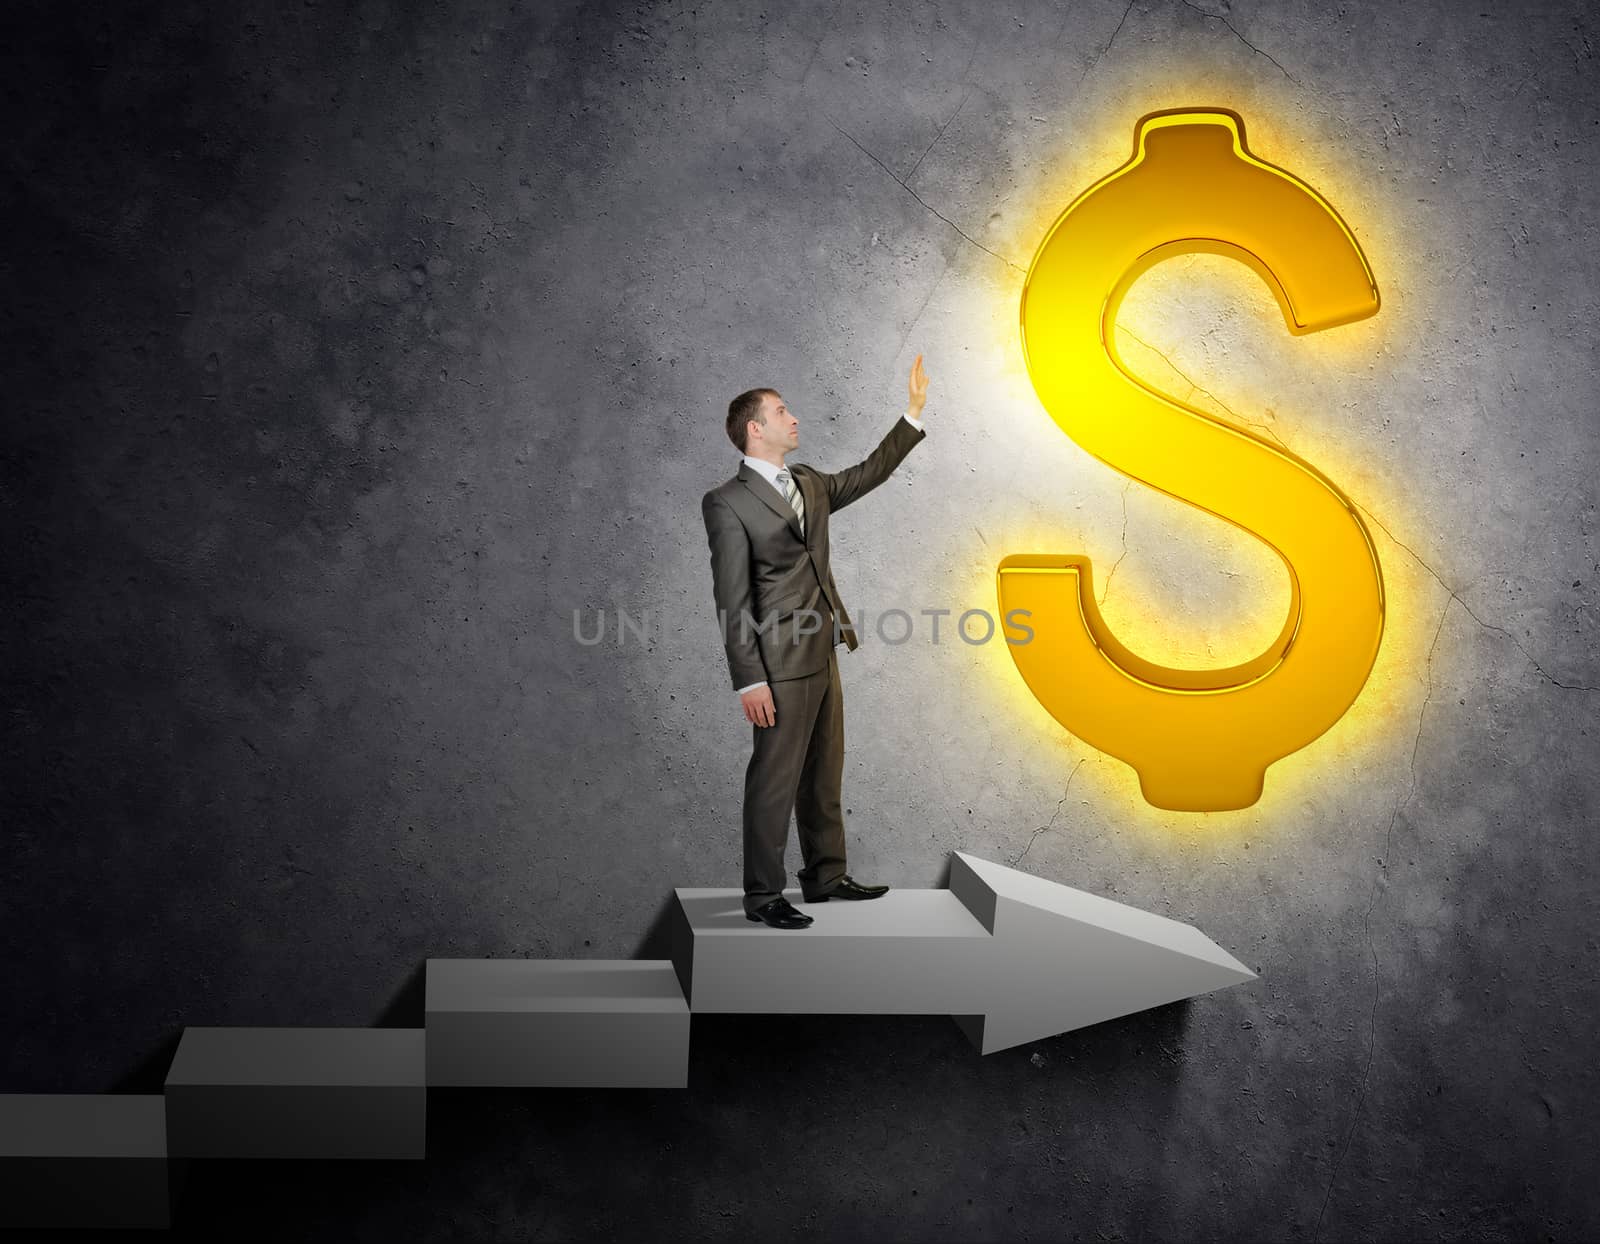 Businessman touching dollar sign standing on stairs, business concept